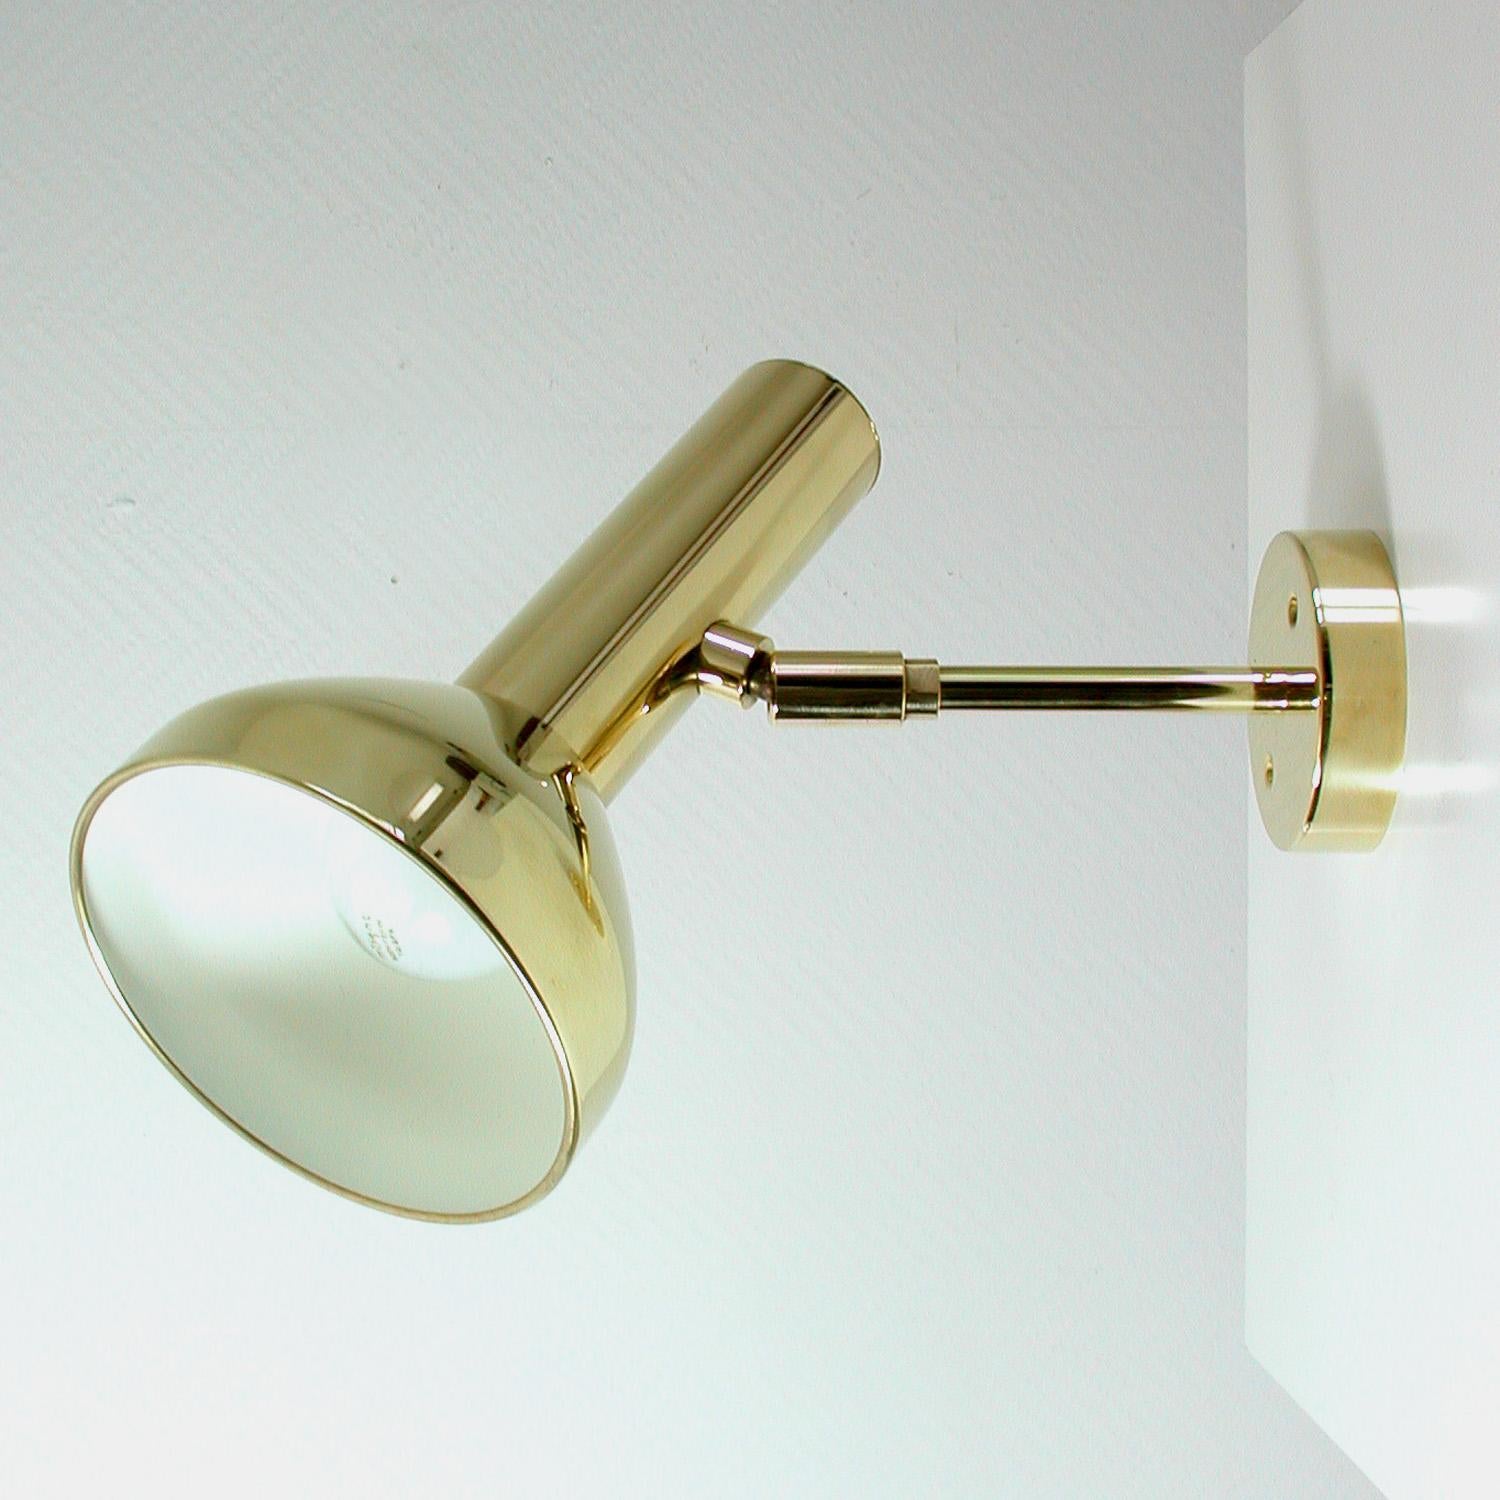 Polished Midcentury German Brass Wall Light Sconce by Cosack, 1960s For Sale